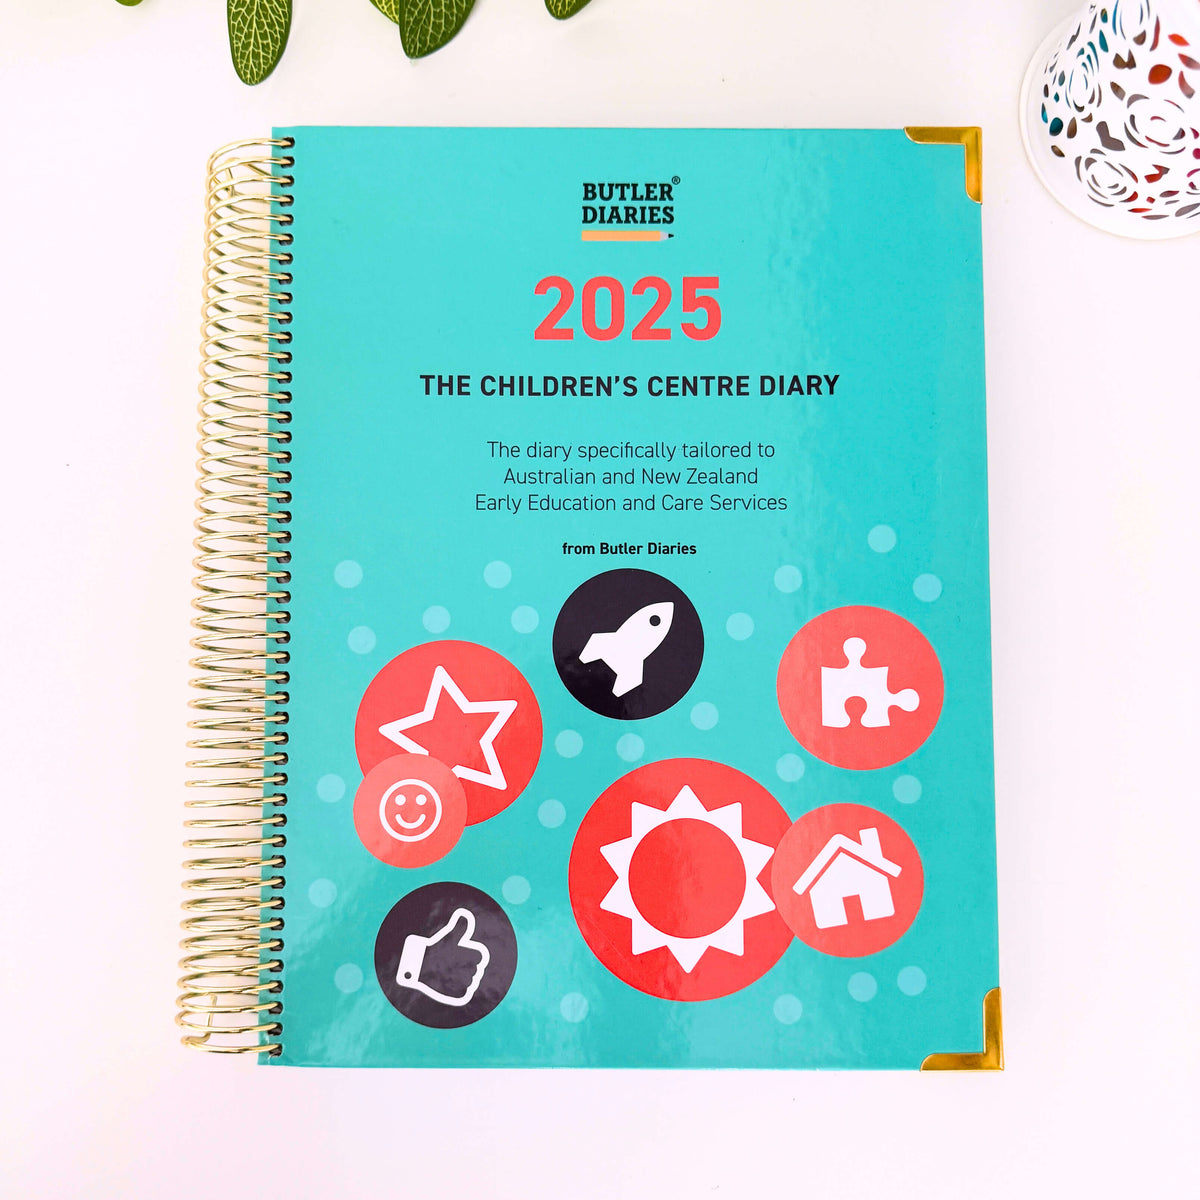 2025 Children's Centre Diary - Hard Cover Spiral Bound